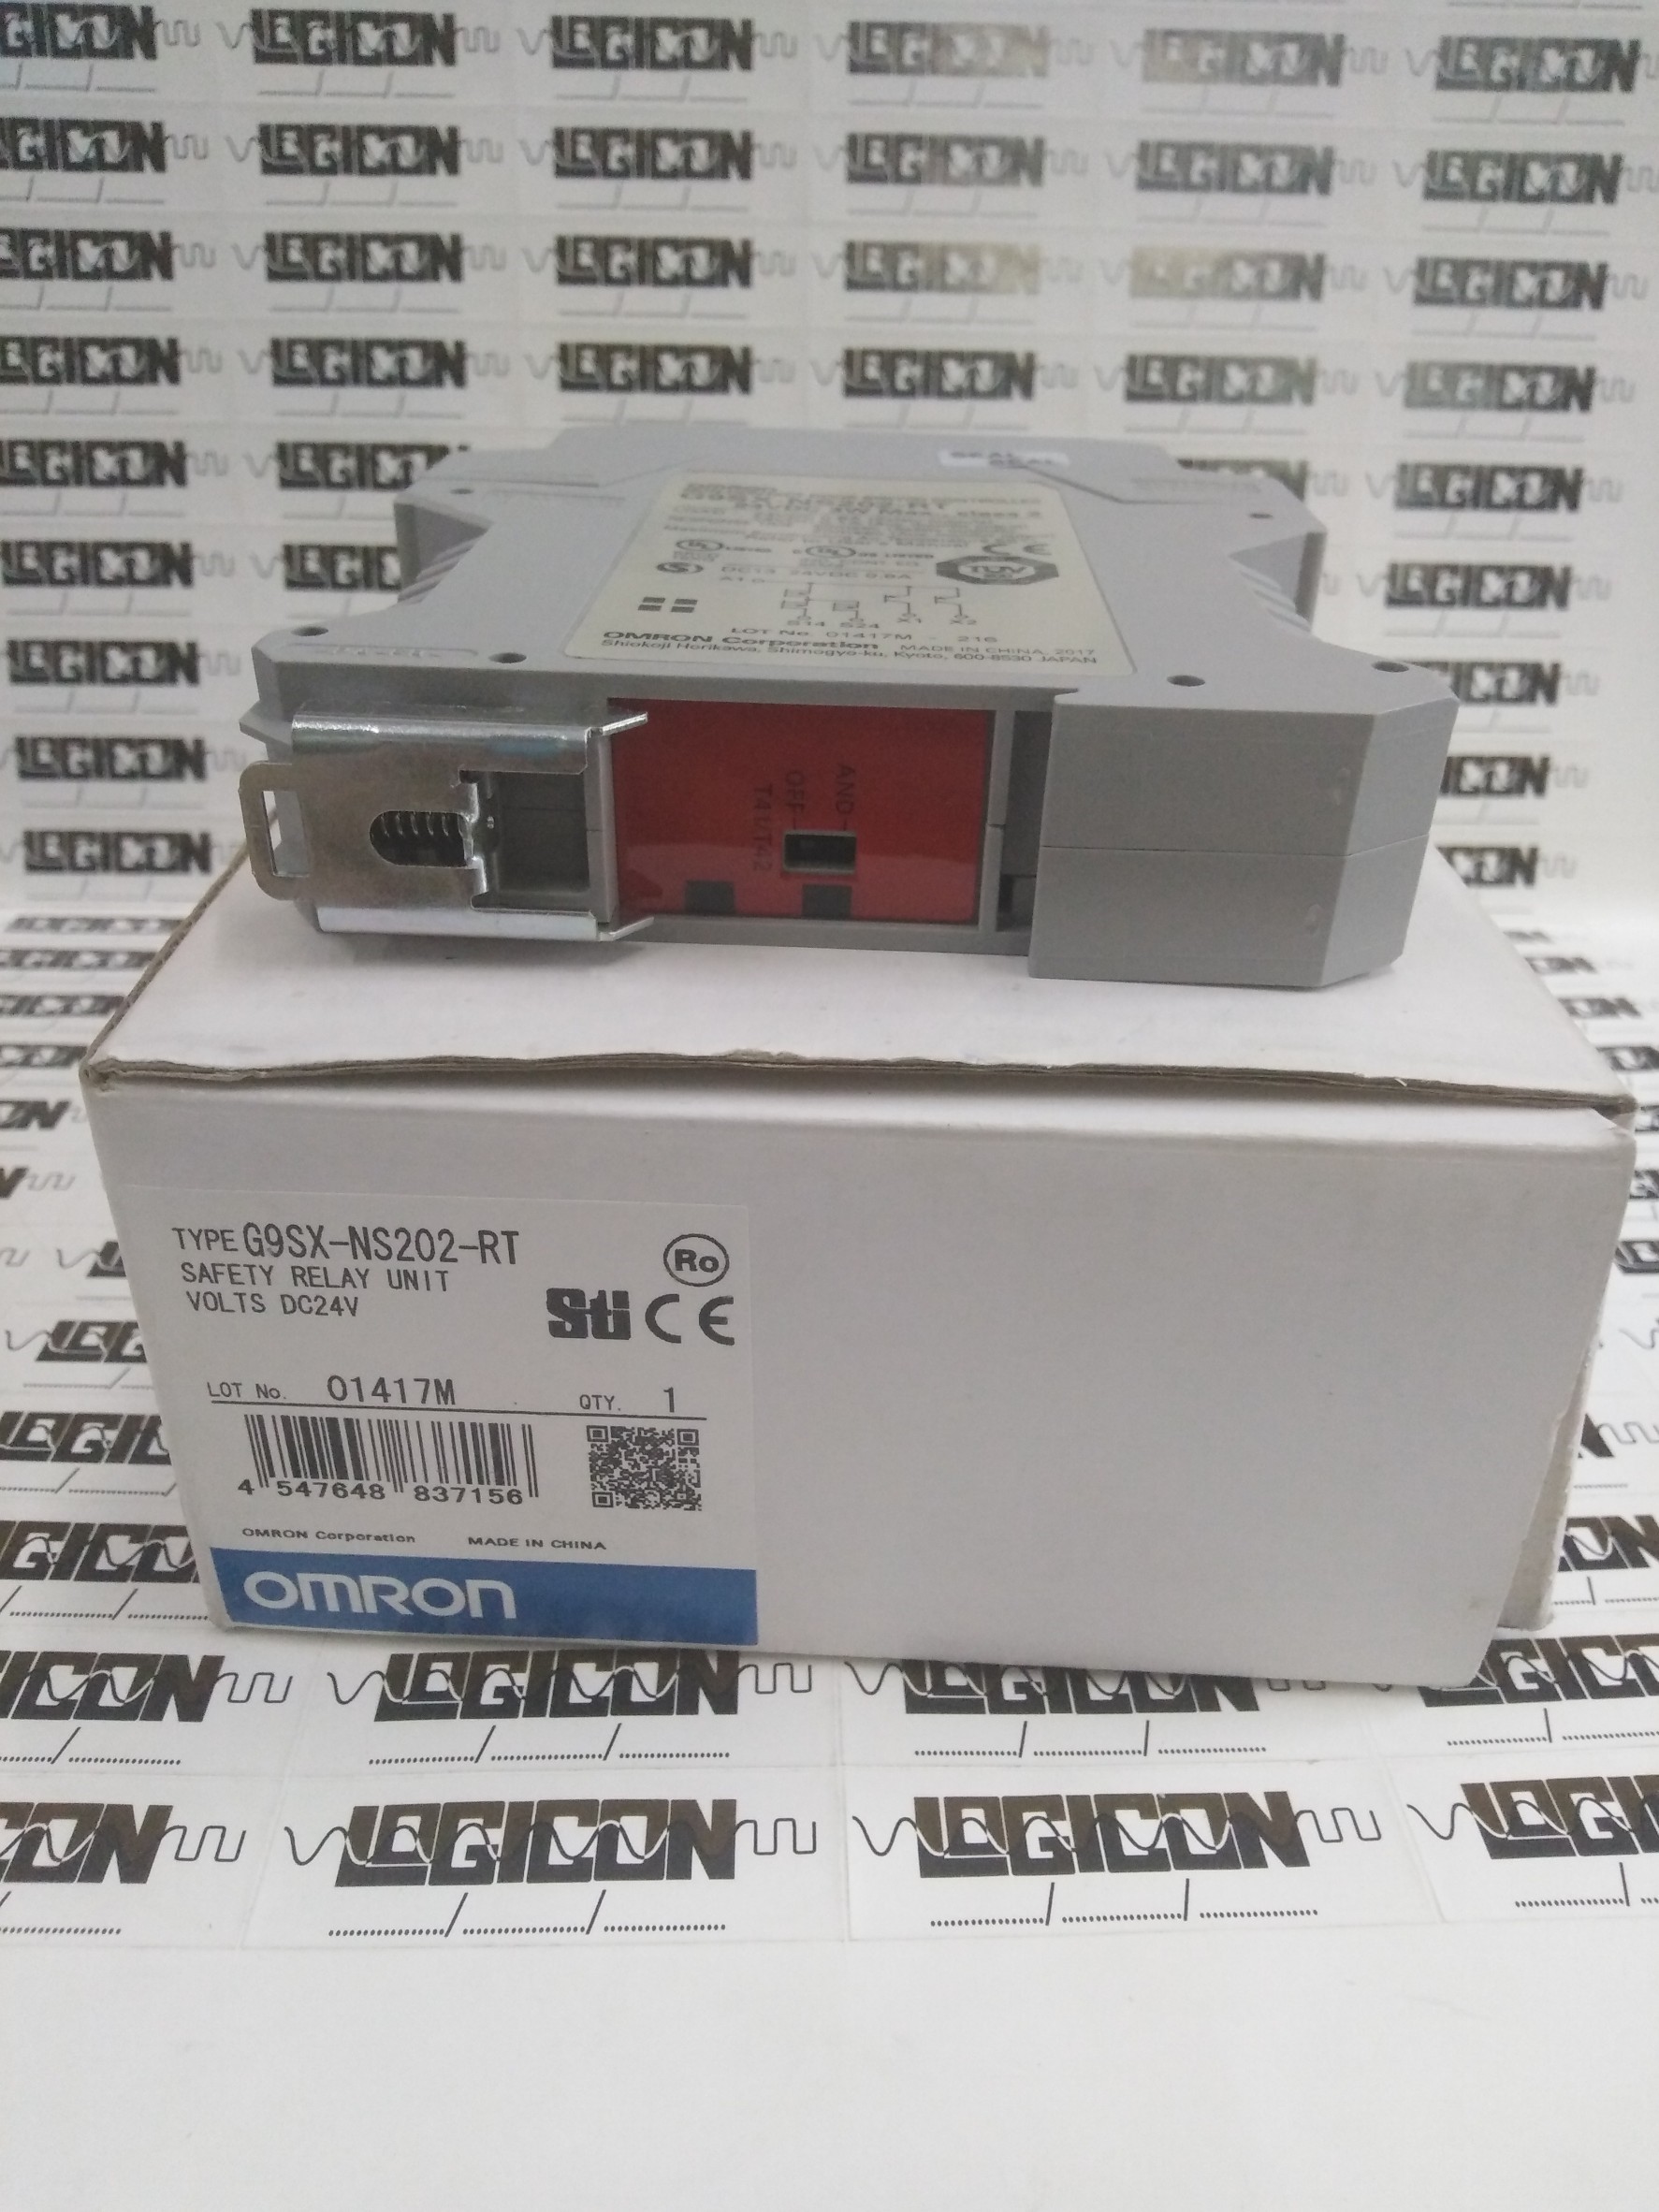 G9SX-NS202-RT (OMRON) SAFETY RELAY UNIT (EC-0158) – LOGICON